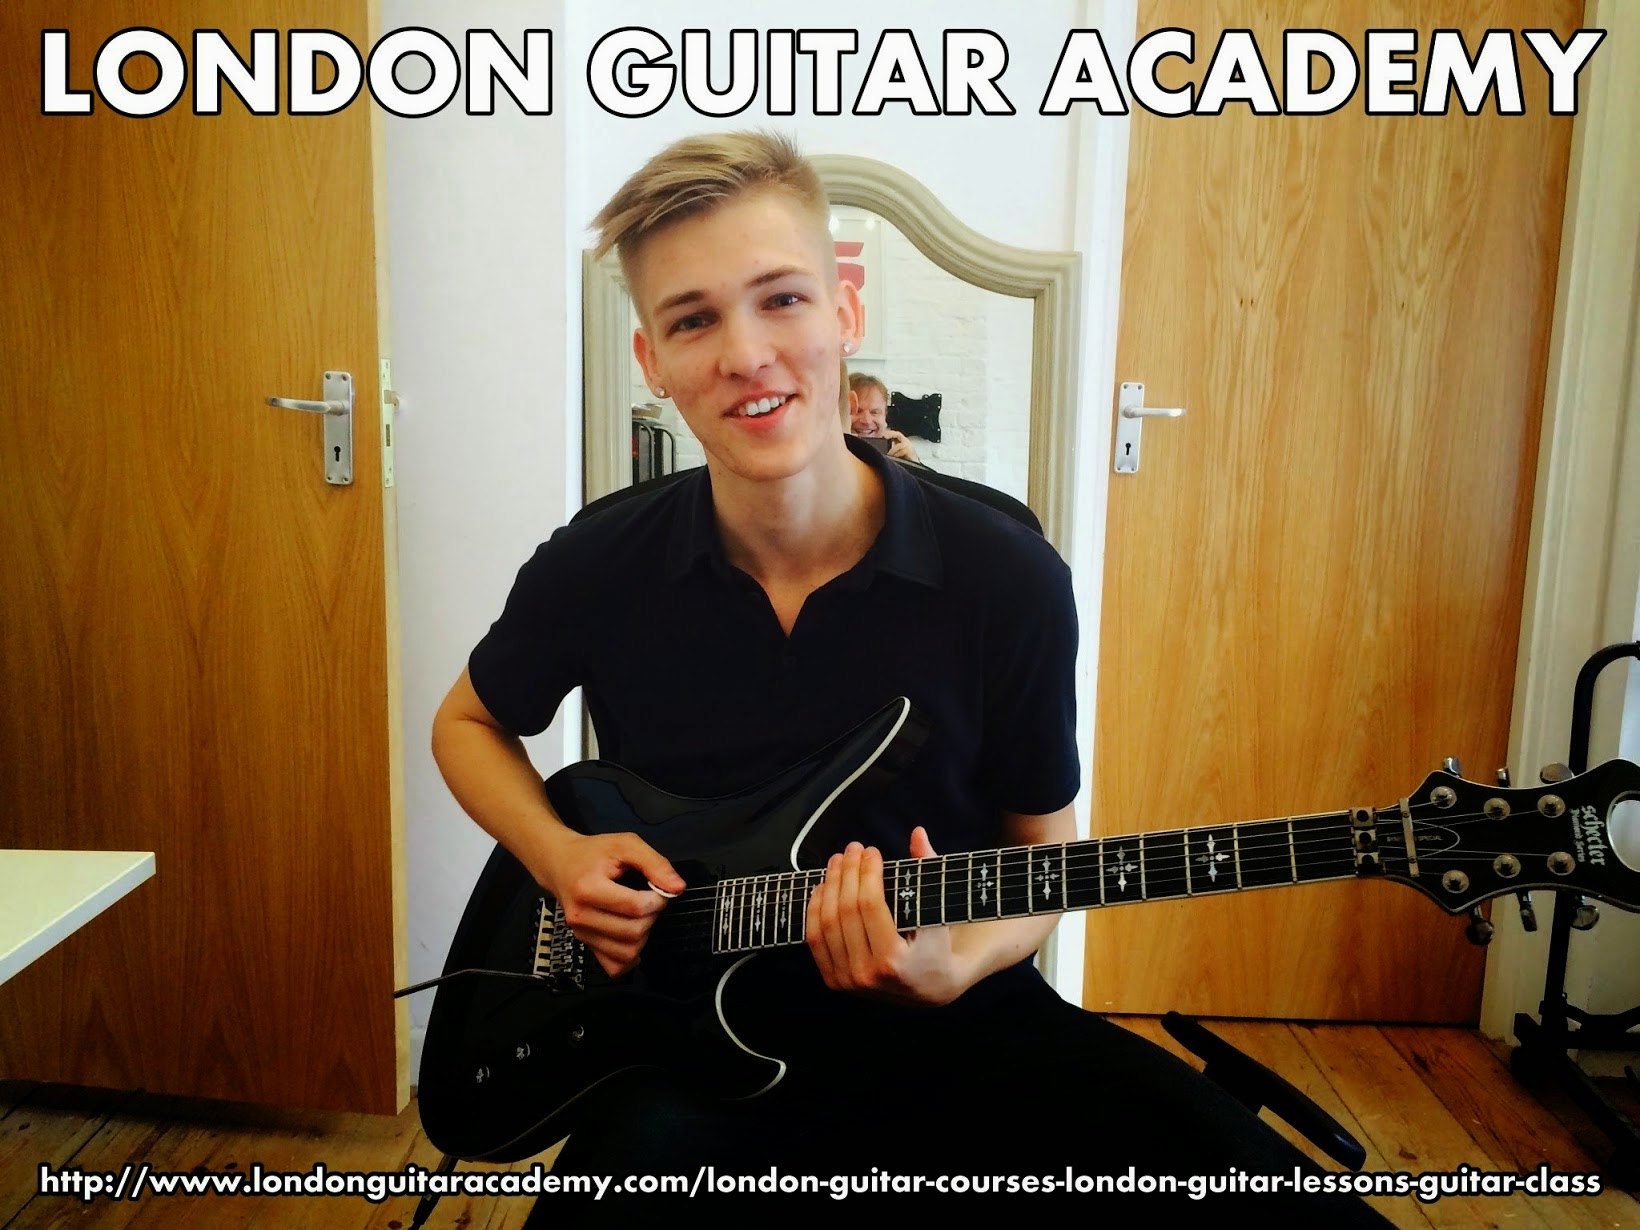 Guitar Lessons  London for all styles of music, ages, and levels in Central London,  including London City, Clerkenwell, Holborn, Shoreditch, Chancery Lane, Barbican, Blackfriars, Angel, Kings Cross, St. Pancras, Pentonville, Finsbury, Farringdon